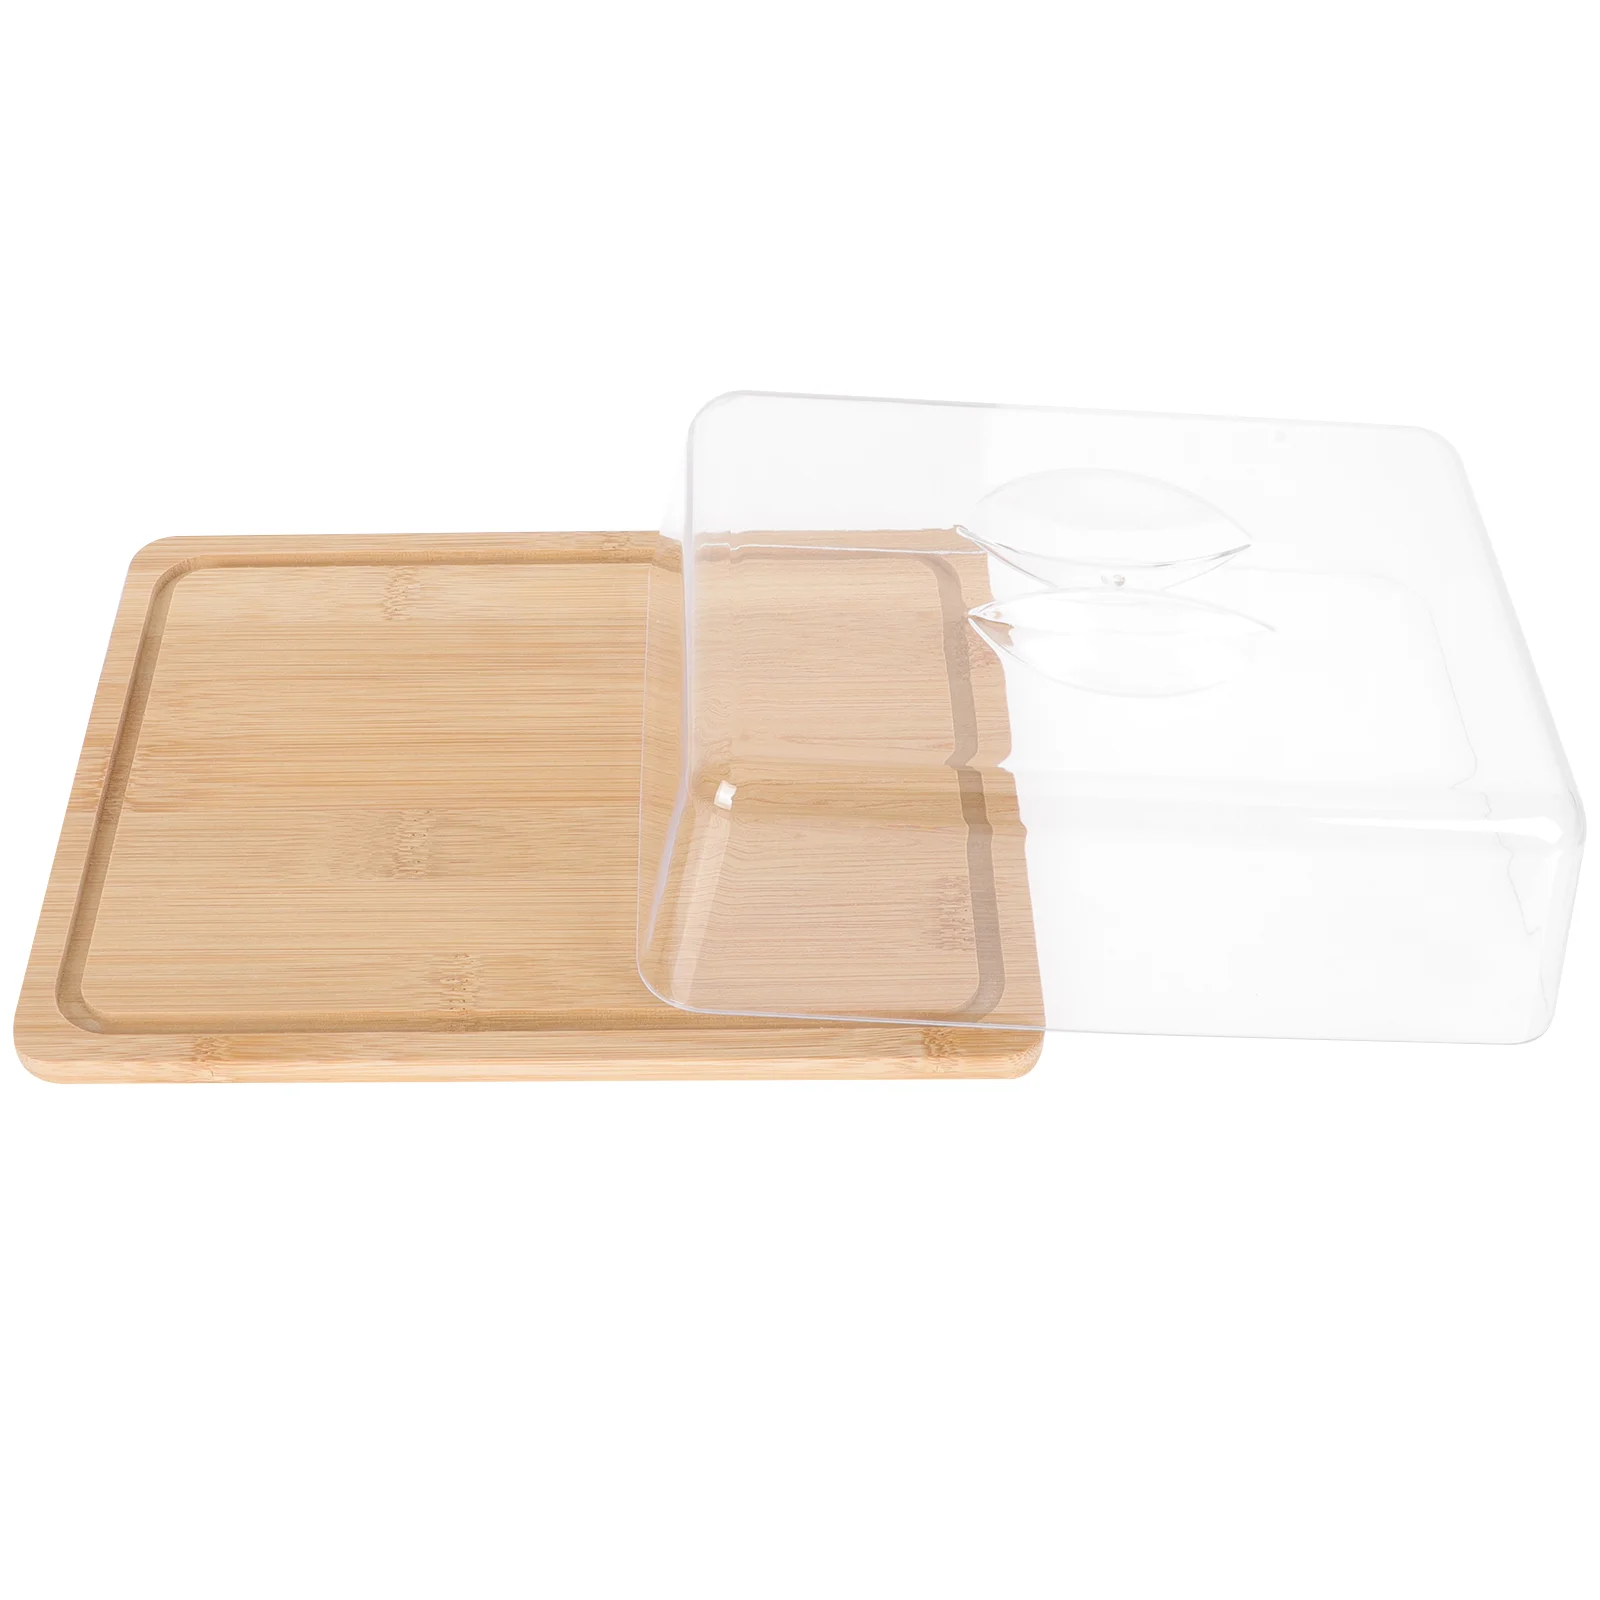 

Snack Box Lid Funny Butter Dish Go Food Containers Lids Dishes Large Wide Oil Pan Countertop Covered